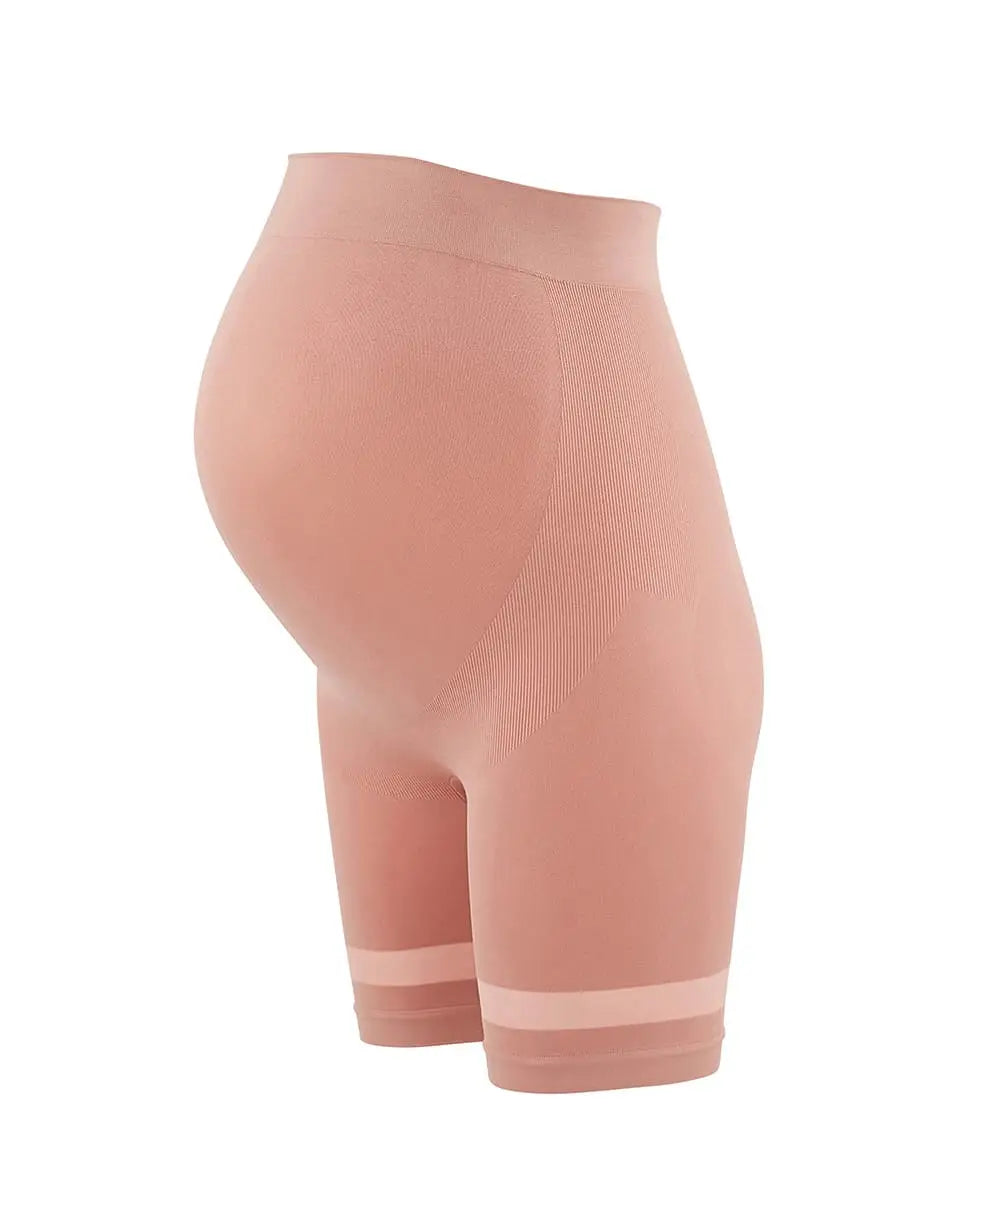 Sport and maternity panty Woma pink - Legging